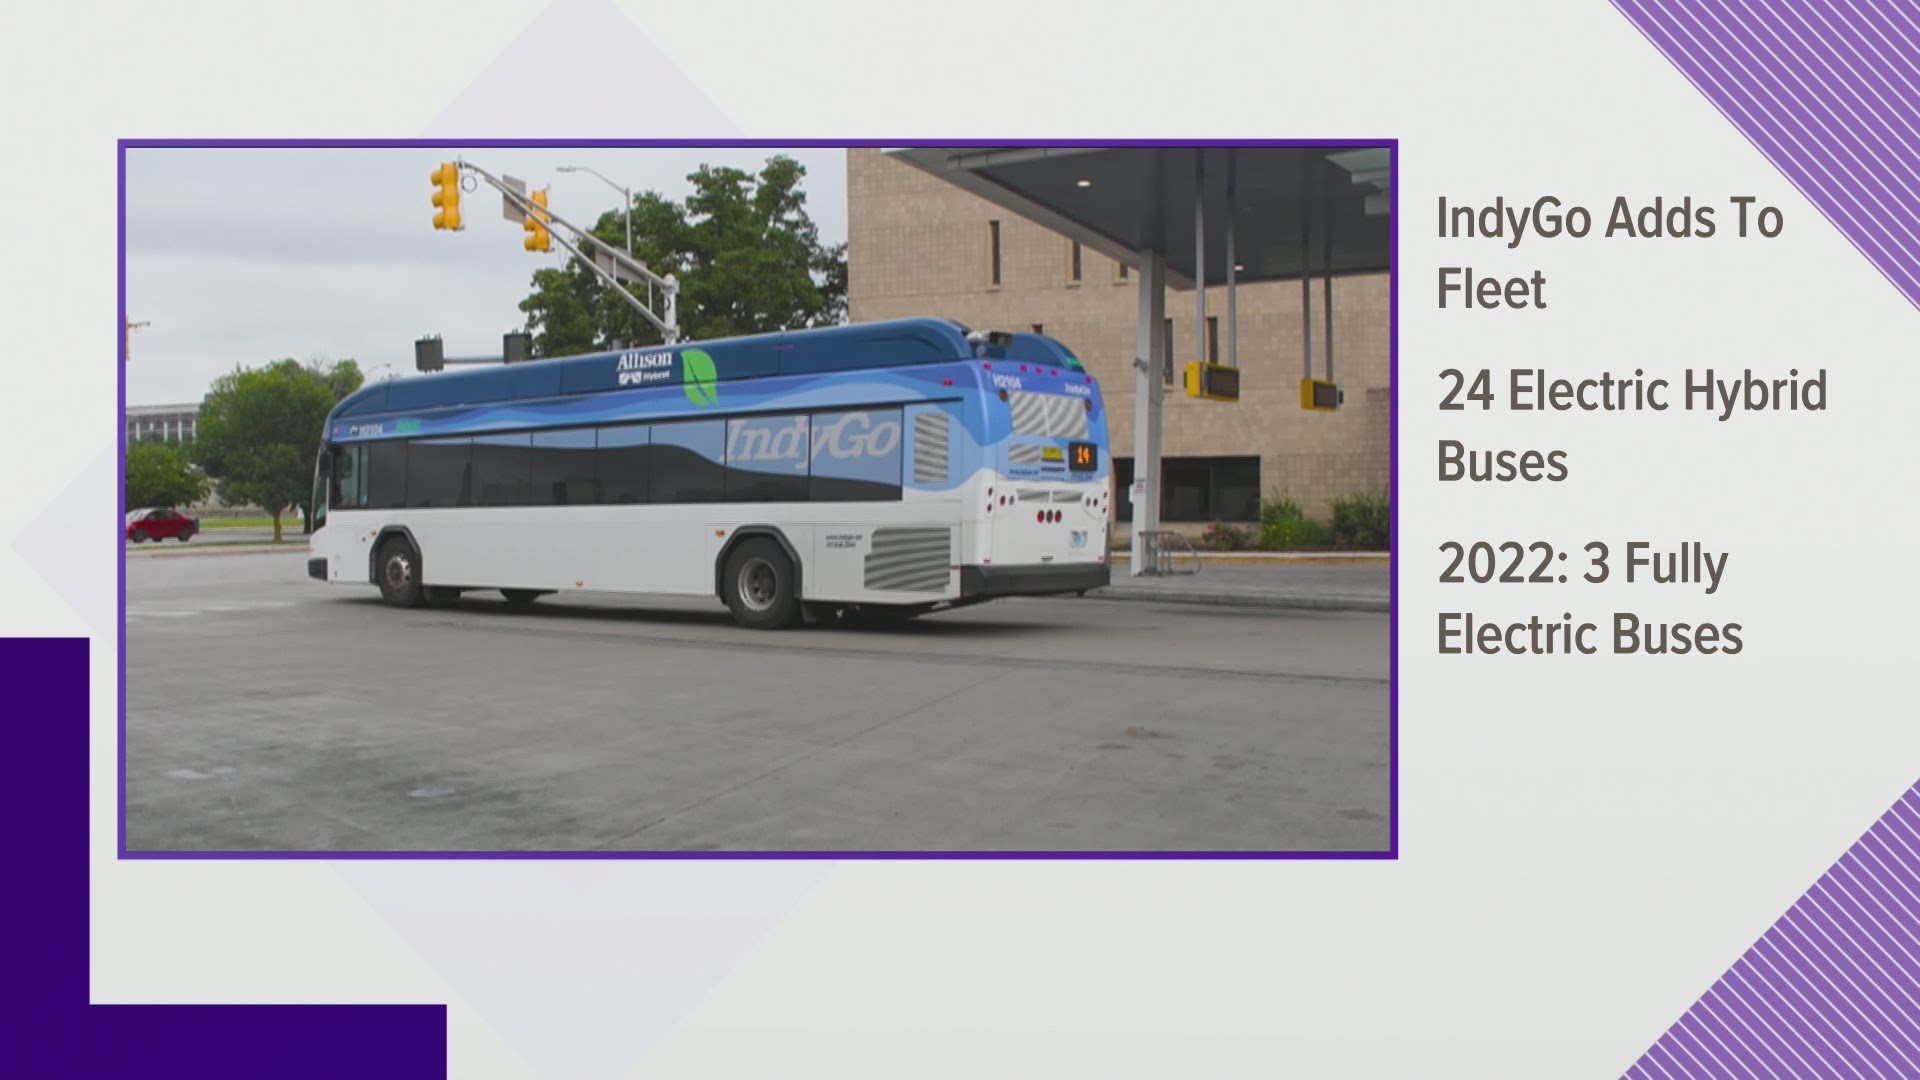 Twenty-four electric-hybrid buses have been added to the IndyGo fleet.